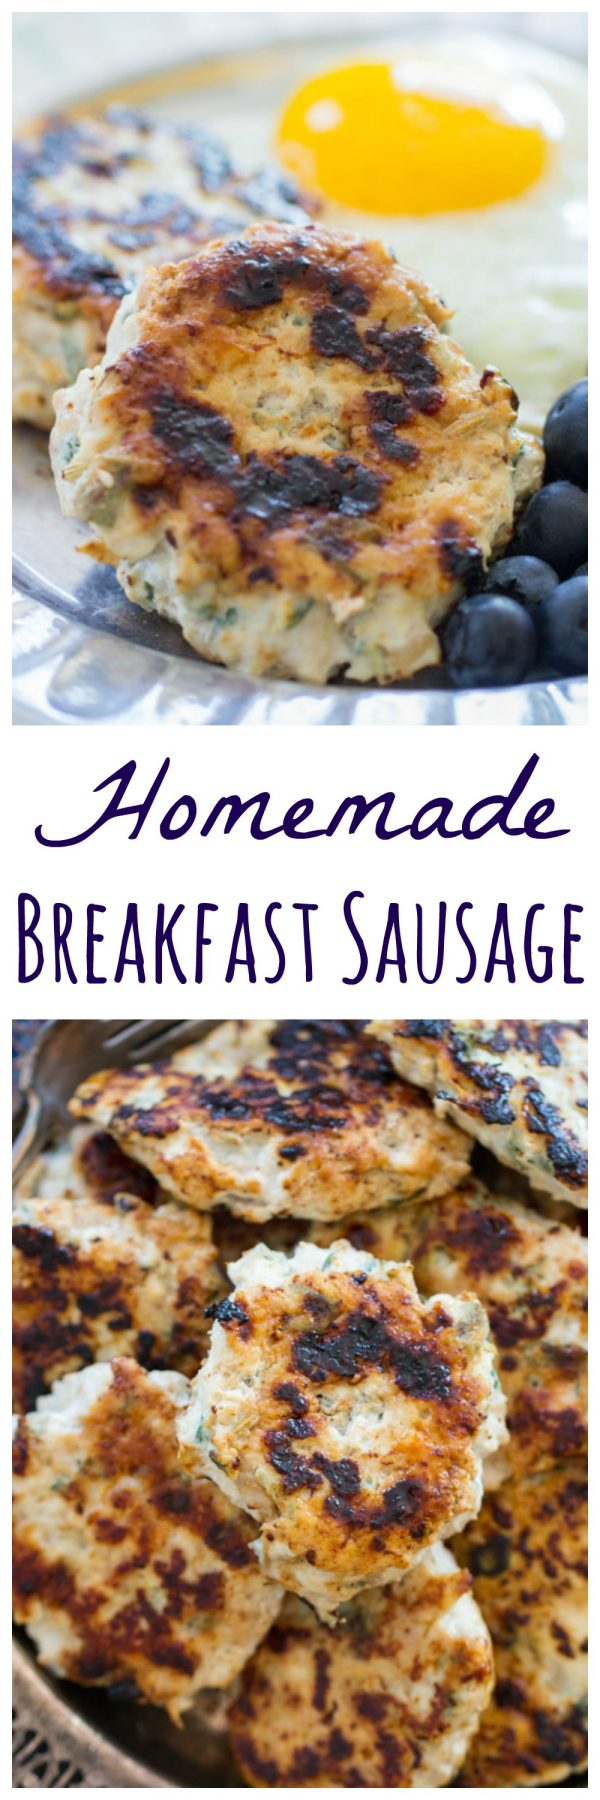 Homemade Breakfast Sausage Recipe - The Gold Lining Girl